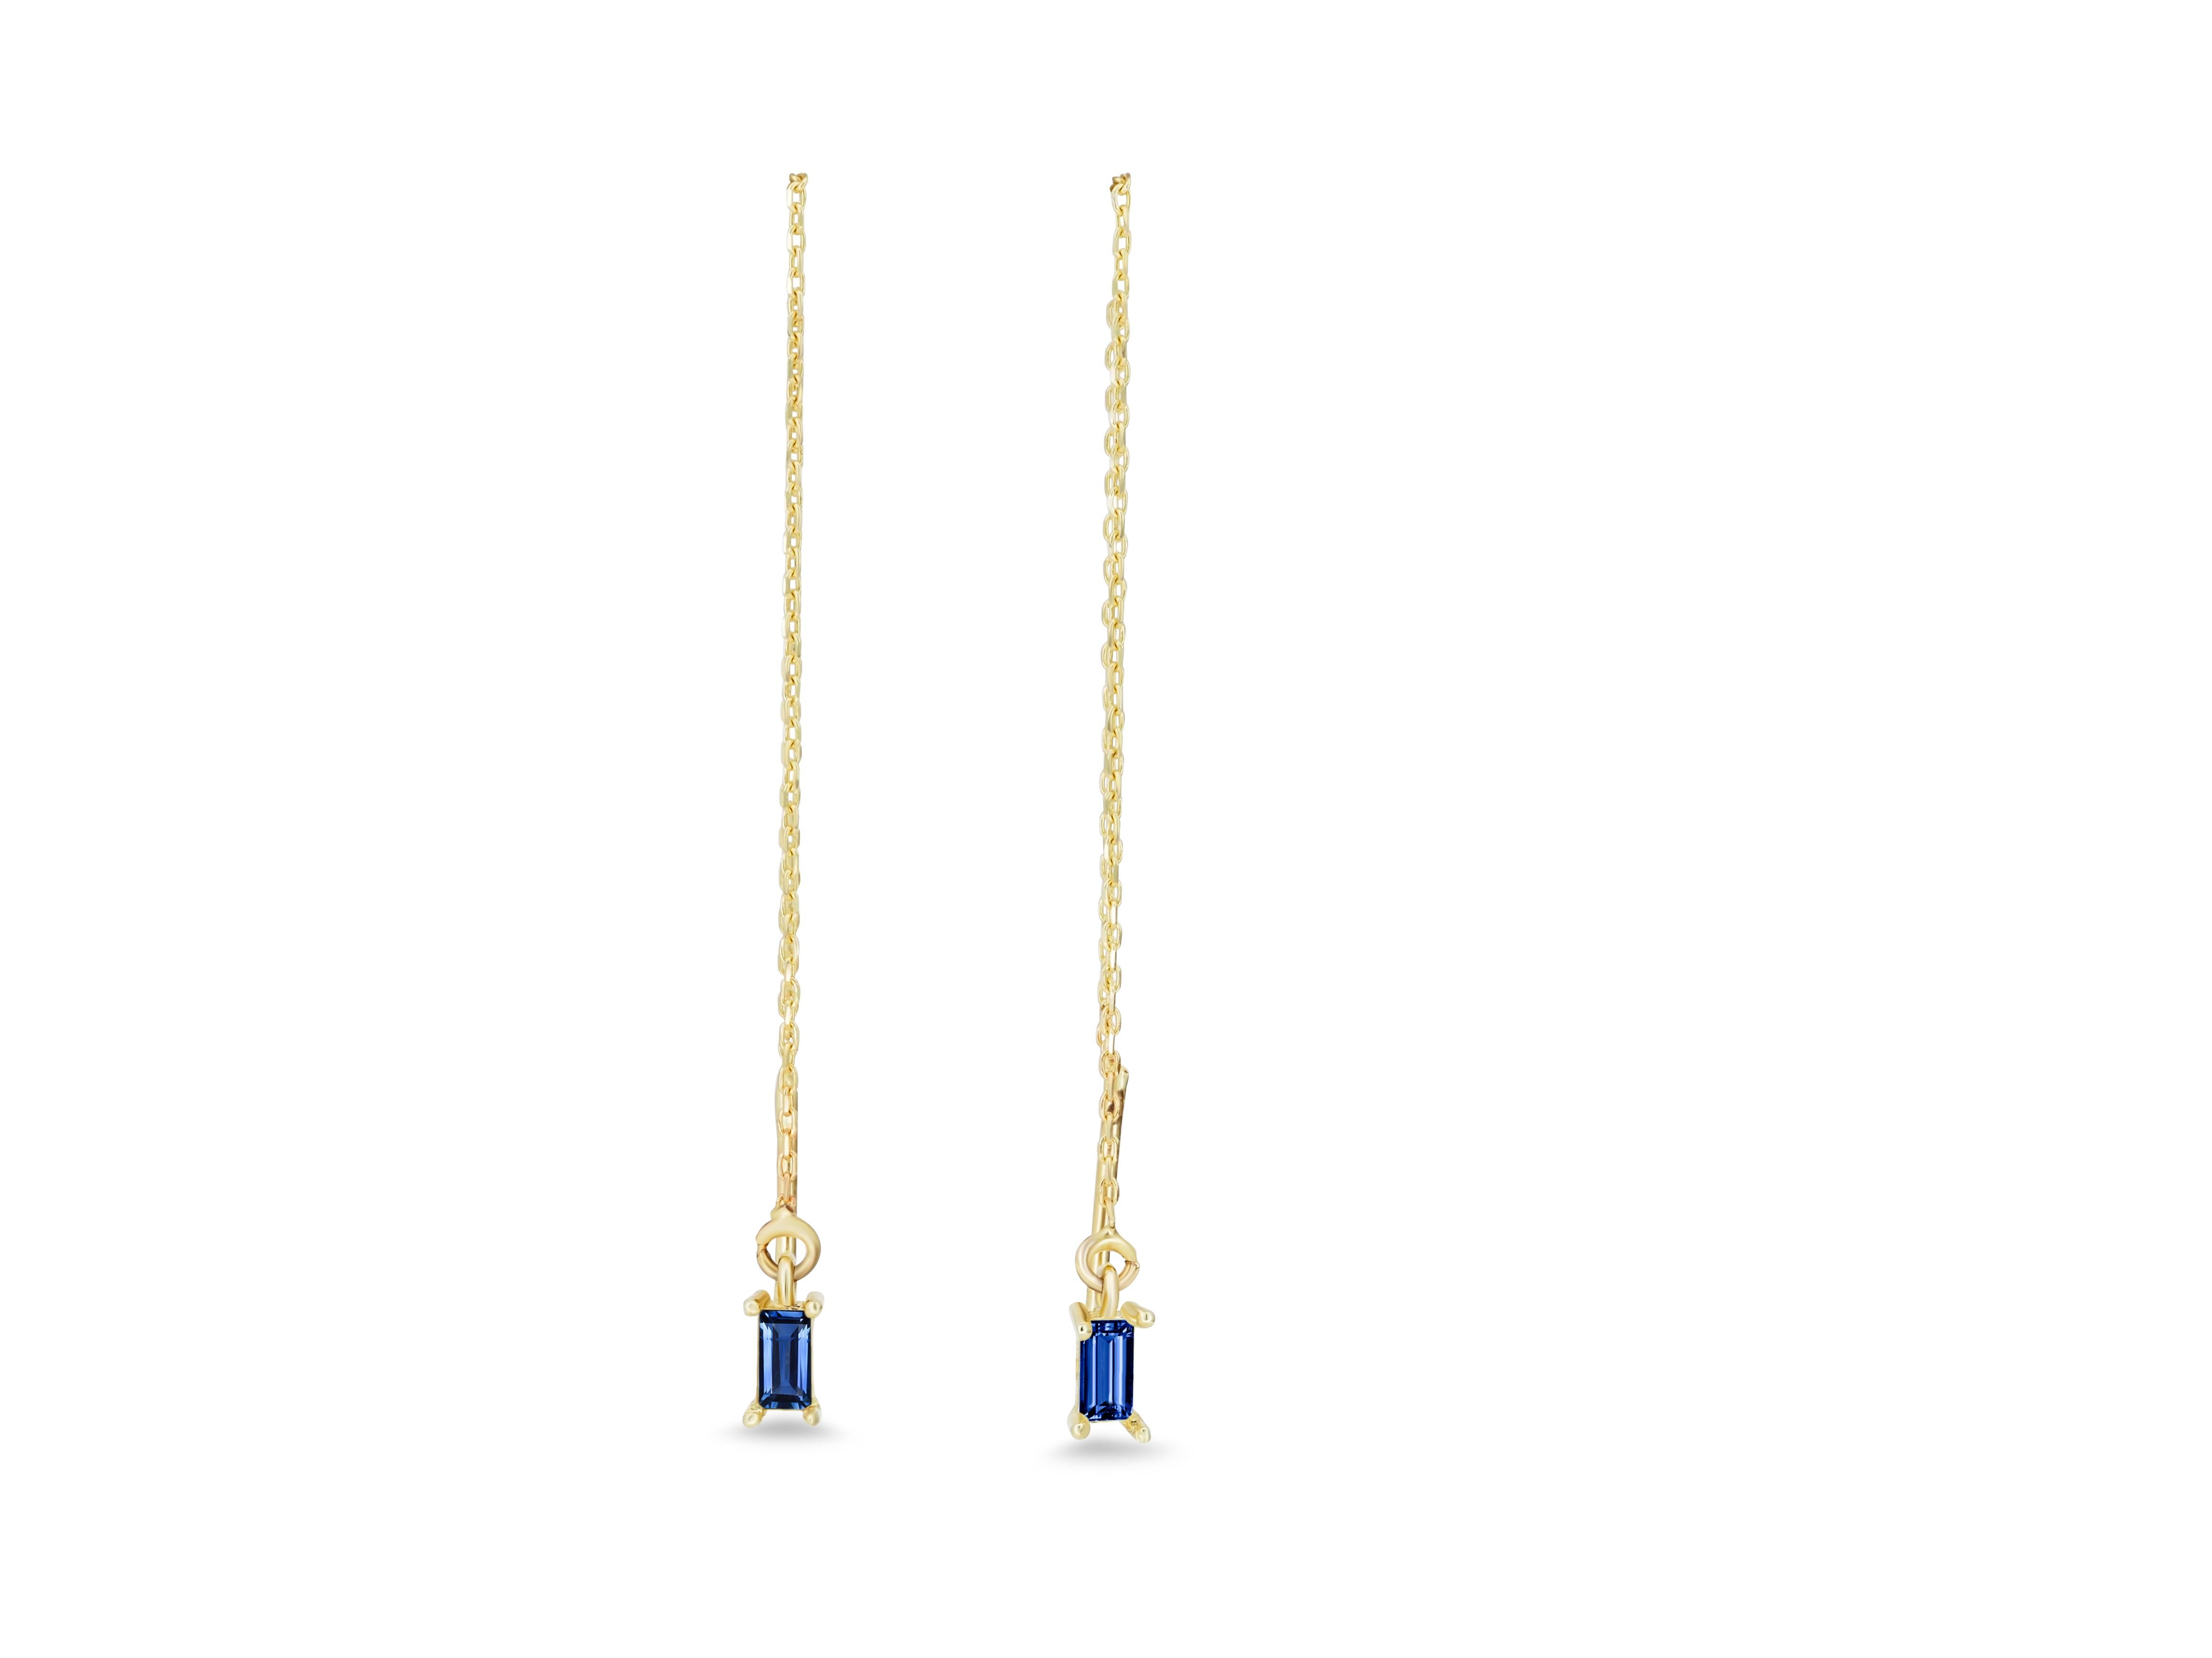 Baguette Cut 14k Solid Gold Drop Earrings with blue sapphire.  Chain Gold Earrings For Sale